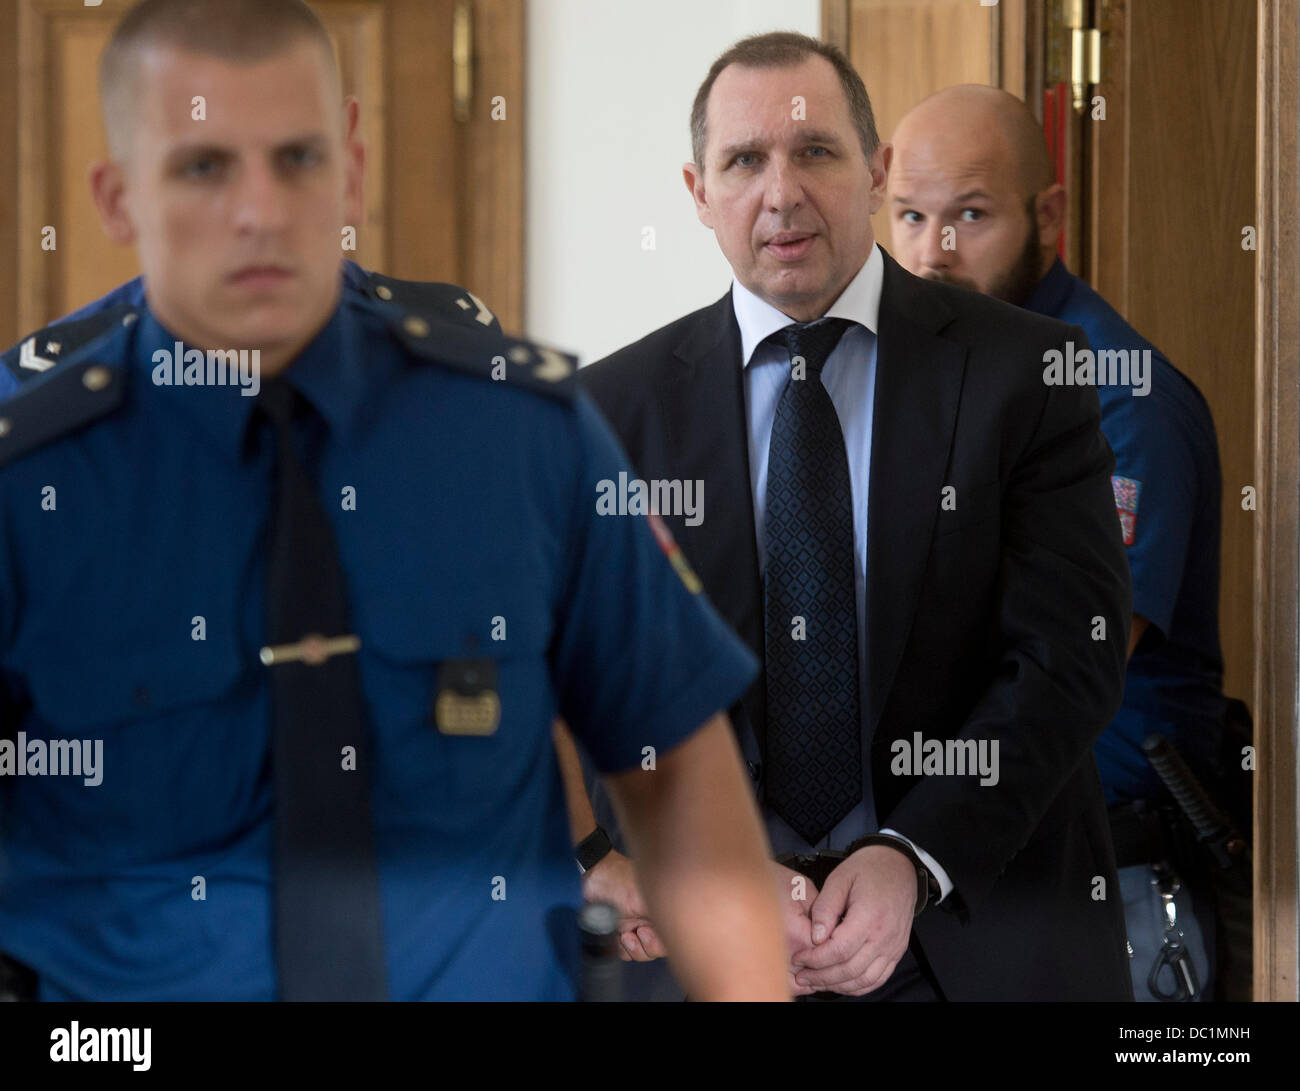 Prague, Czech Republic. 7th Aug, 2013. Former politician Petr Kott, center, leaves the Prague Regional Court, Prague, Czech Republic, August 7, 2013. David Rath, former Social Democrat (CSSD) regional governor and MP member, and ten other people are charged with corruption and manipulation of public tenders. Rath has been in custody since May 2012 when the police caught him with seven million crowns. Rath faces up to 12 years in prison. (CTK Photo/Michal Kamaryt/Alamy Live News Stock Photo